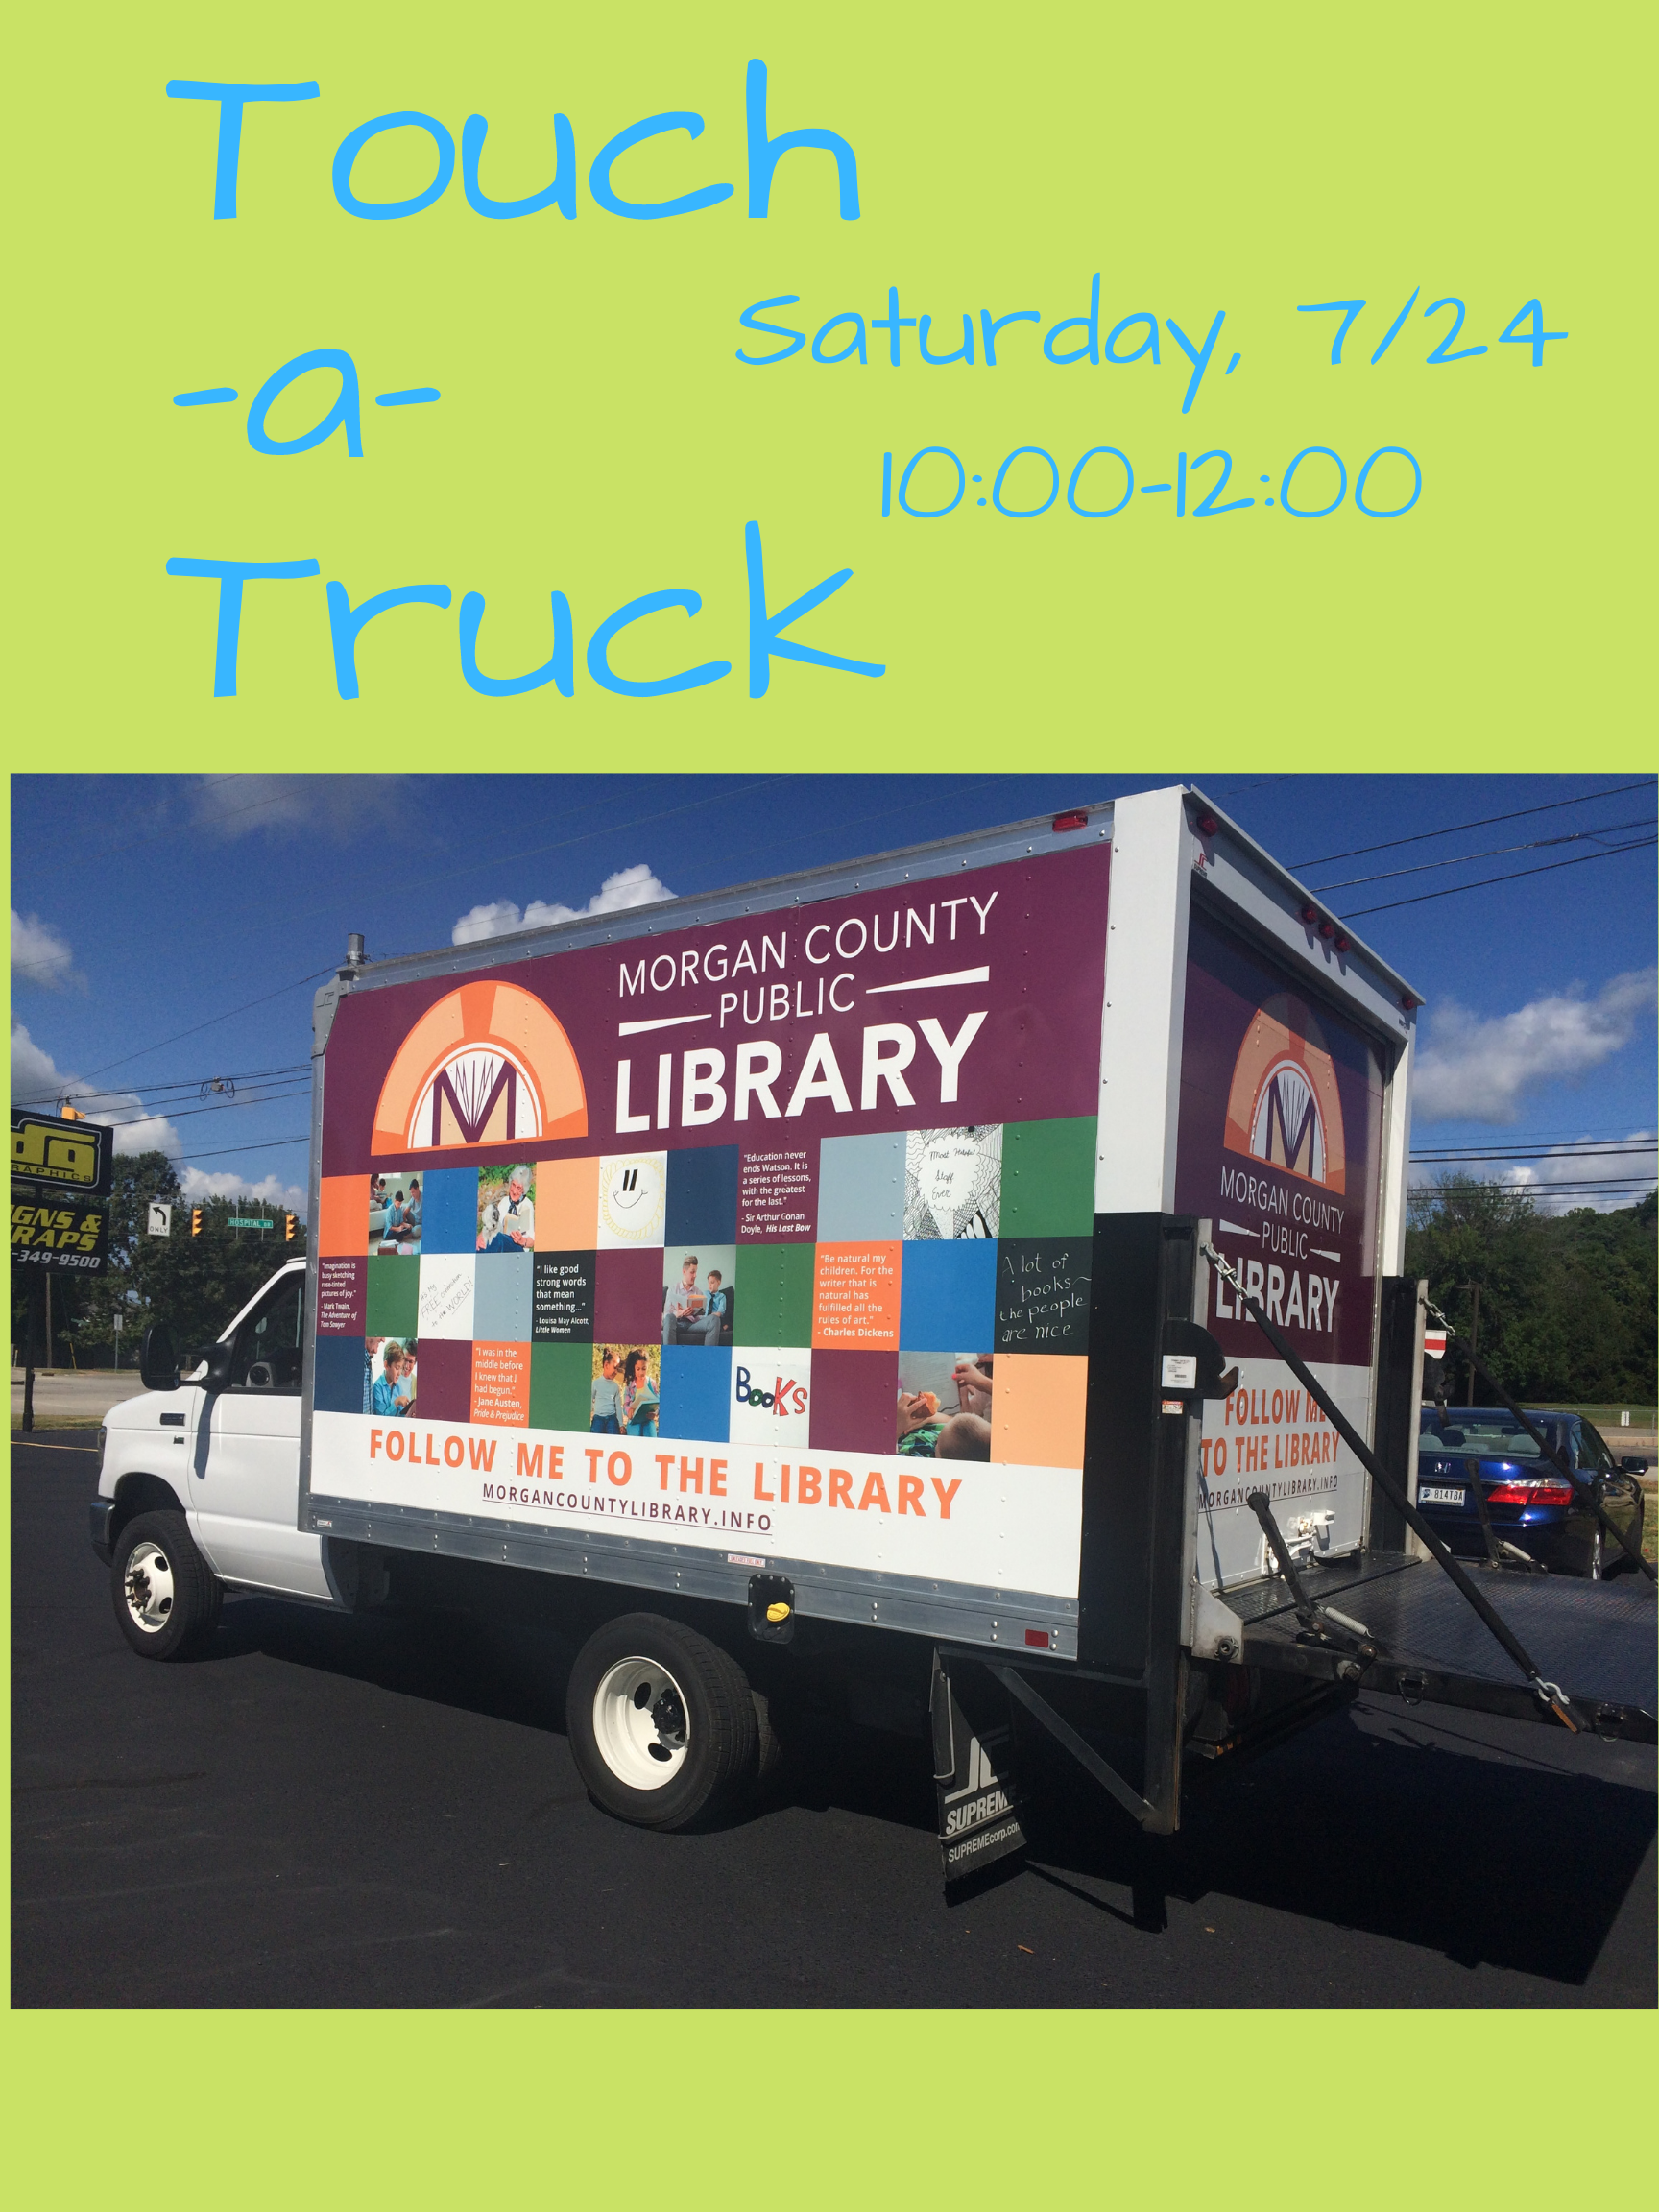 light green background, light blue text about touch a truck, image of library box truck